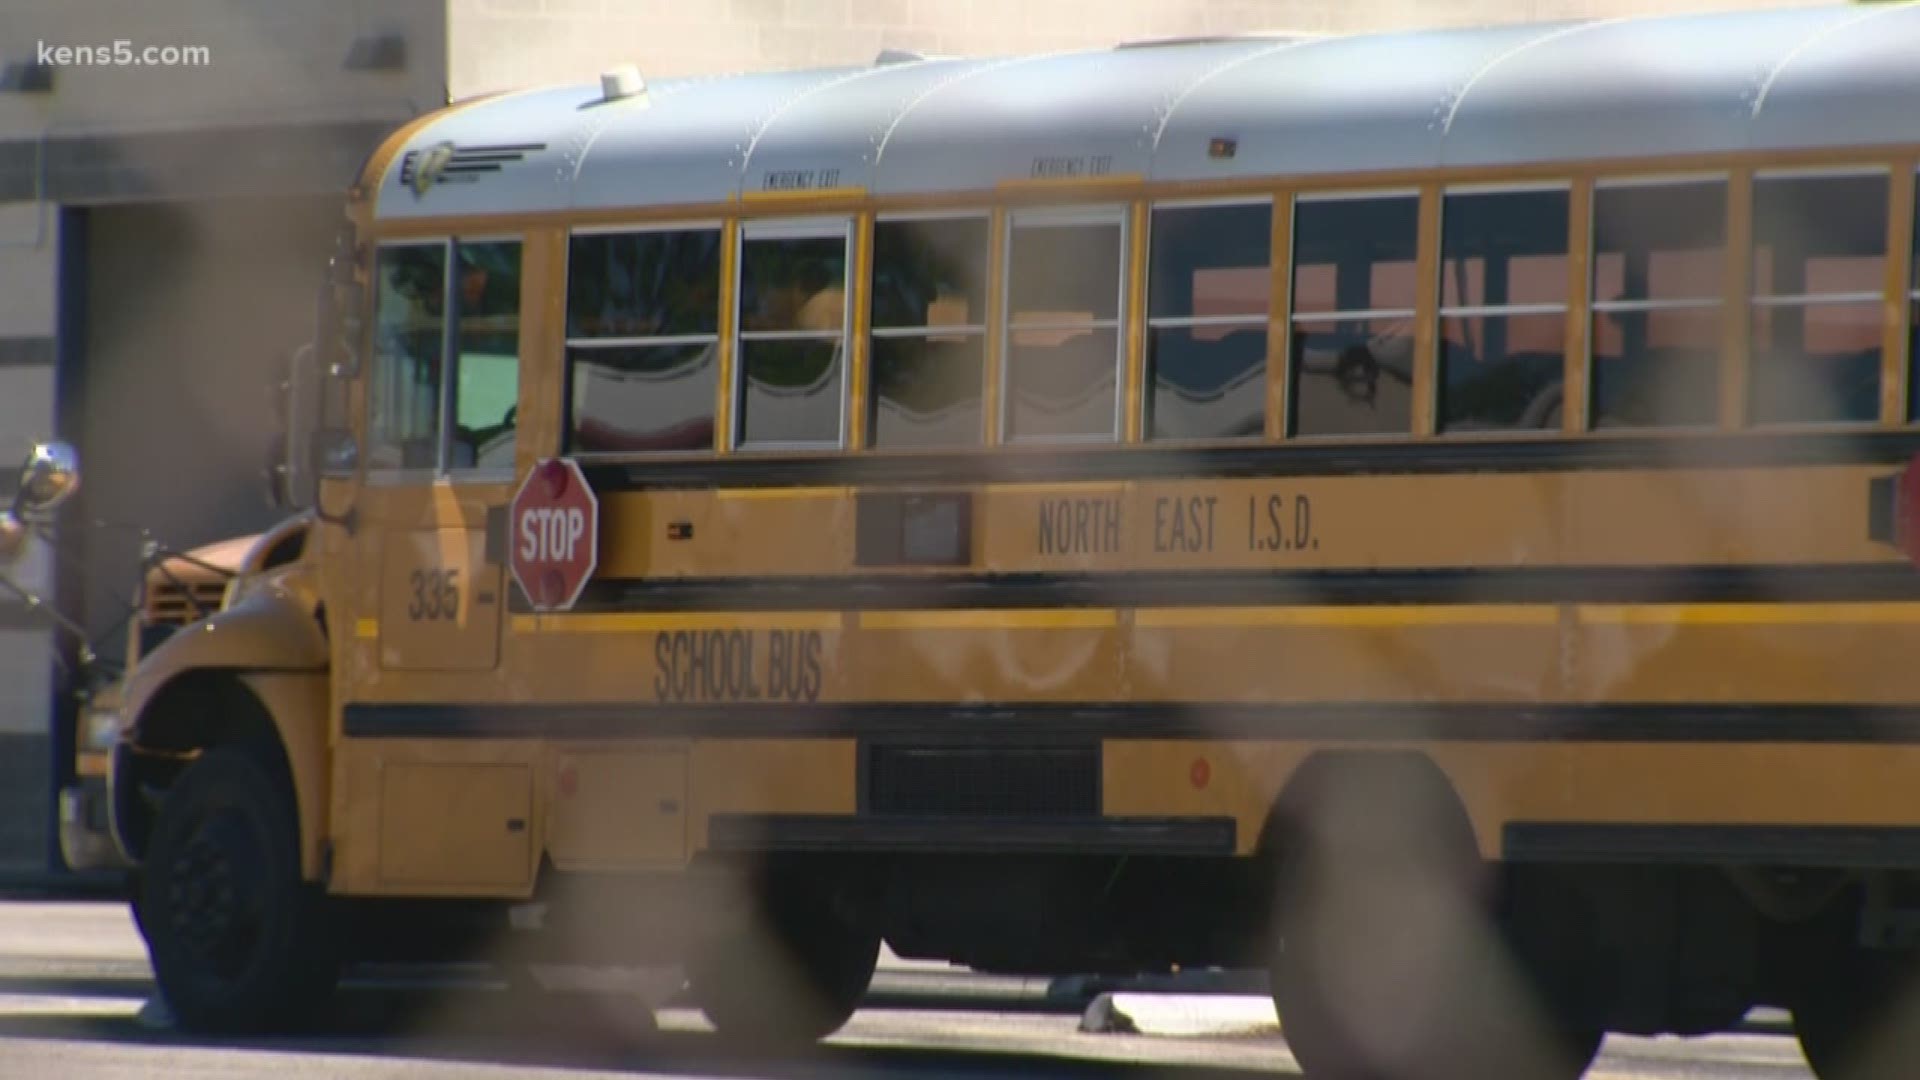 A San Antonio school district has a new safety plan to protect students. But it turns out, at least one campus is breaking its own rules.